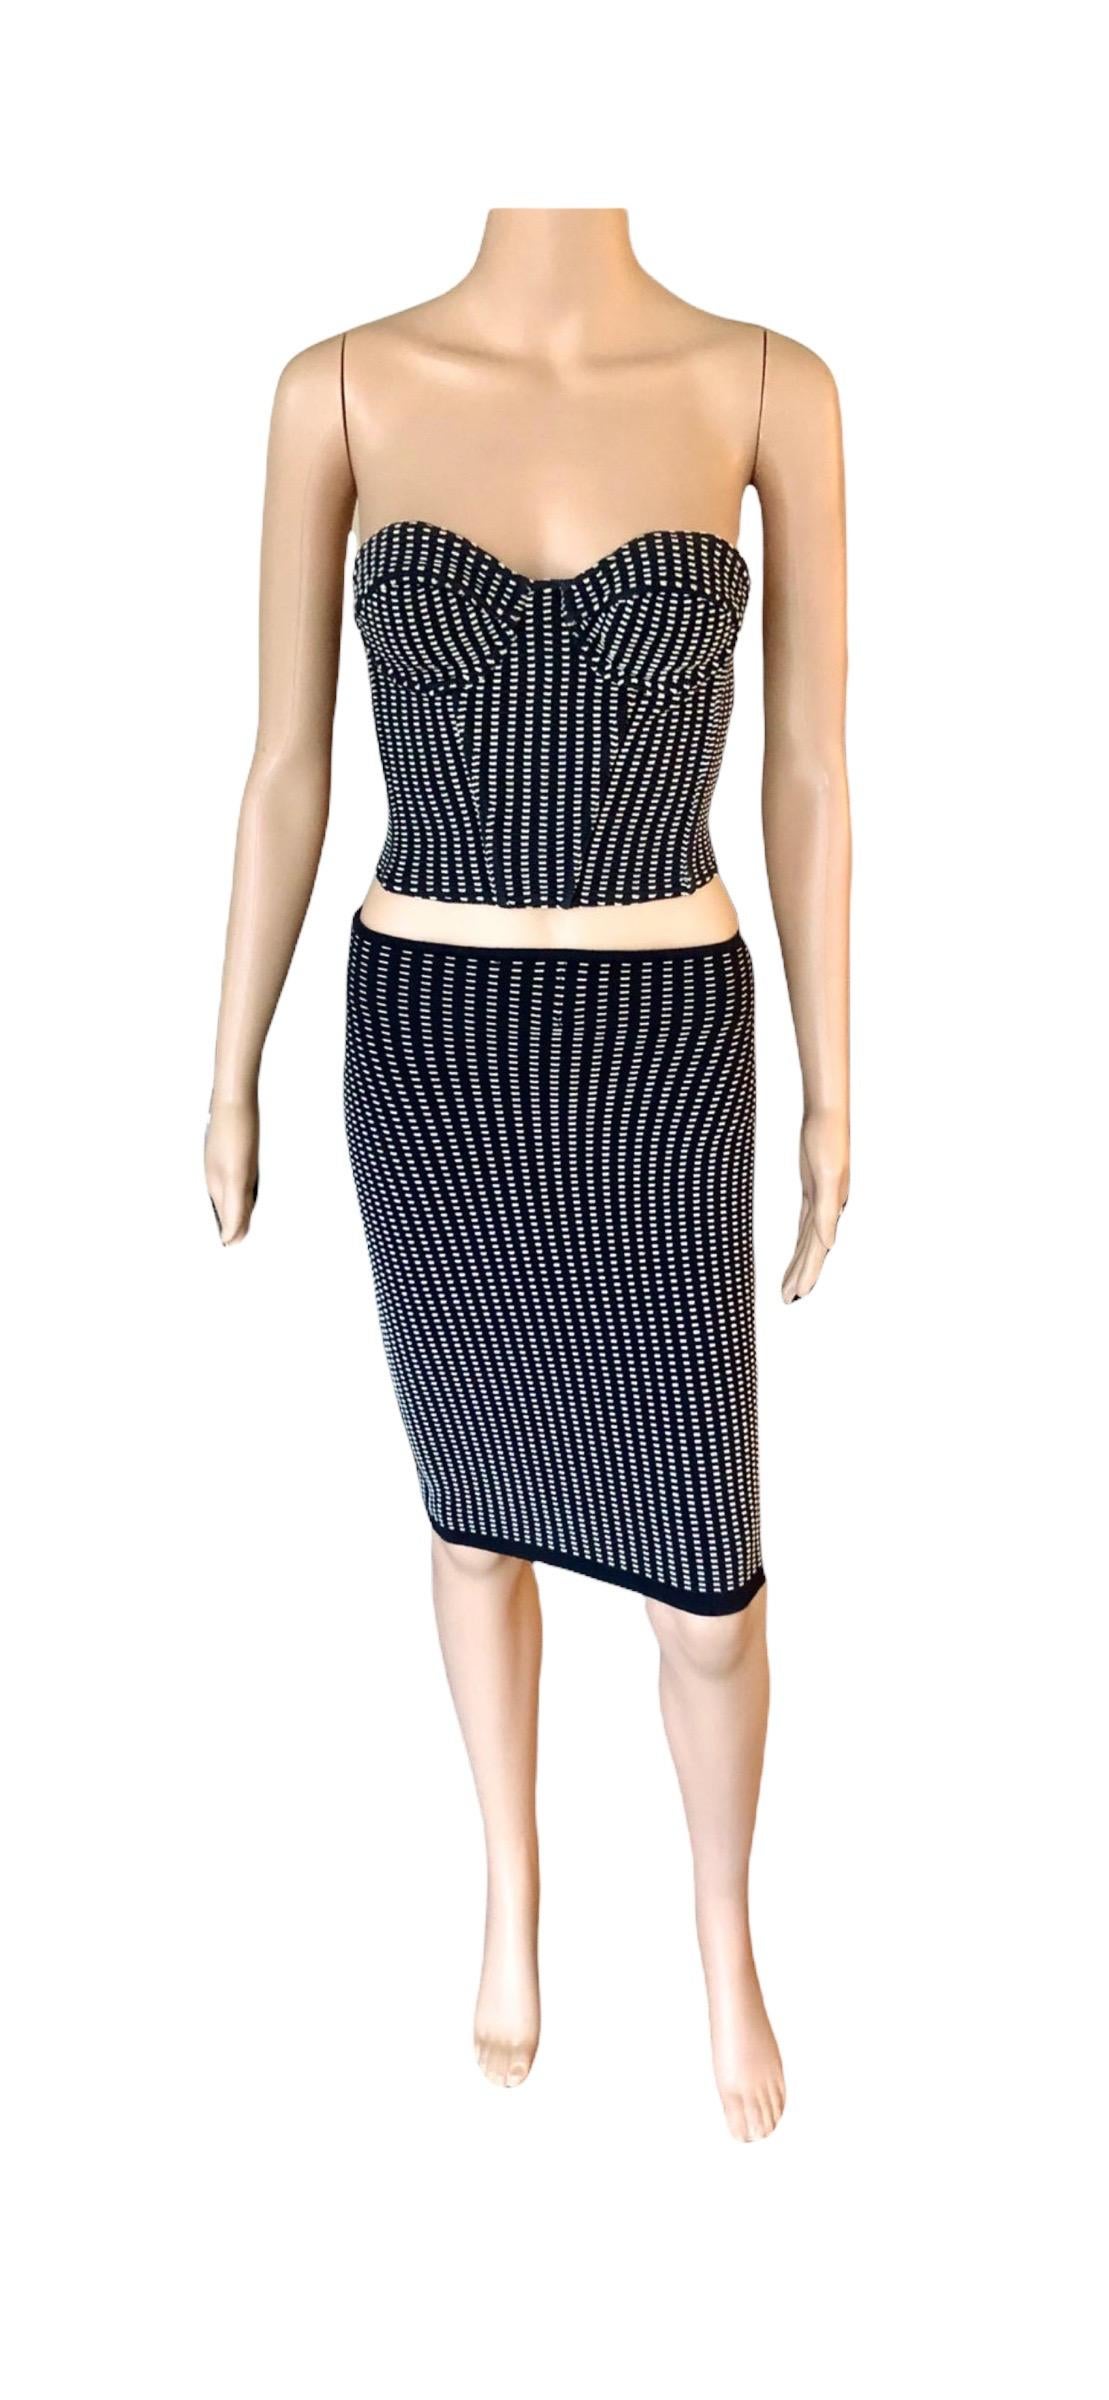 Azzedine Alaia S/S 1991 Vintage Skirt and Bustier Crop Top 2 Piece Set  7